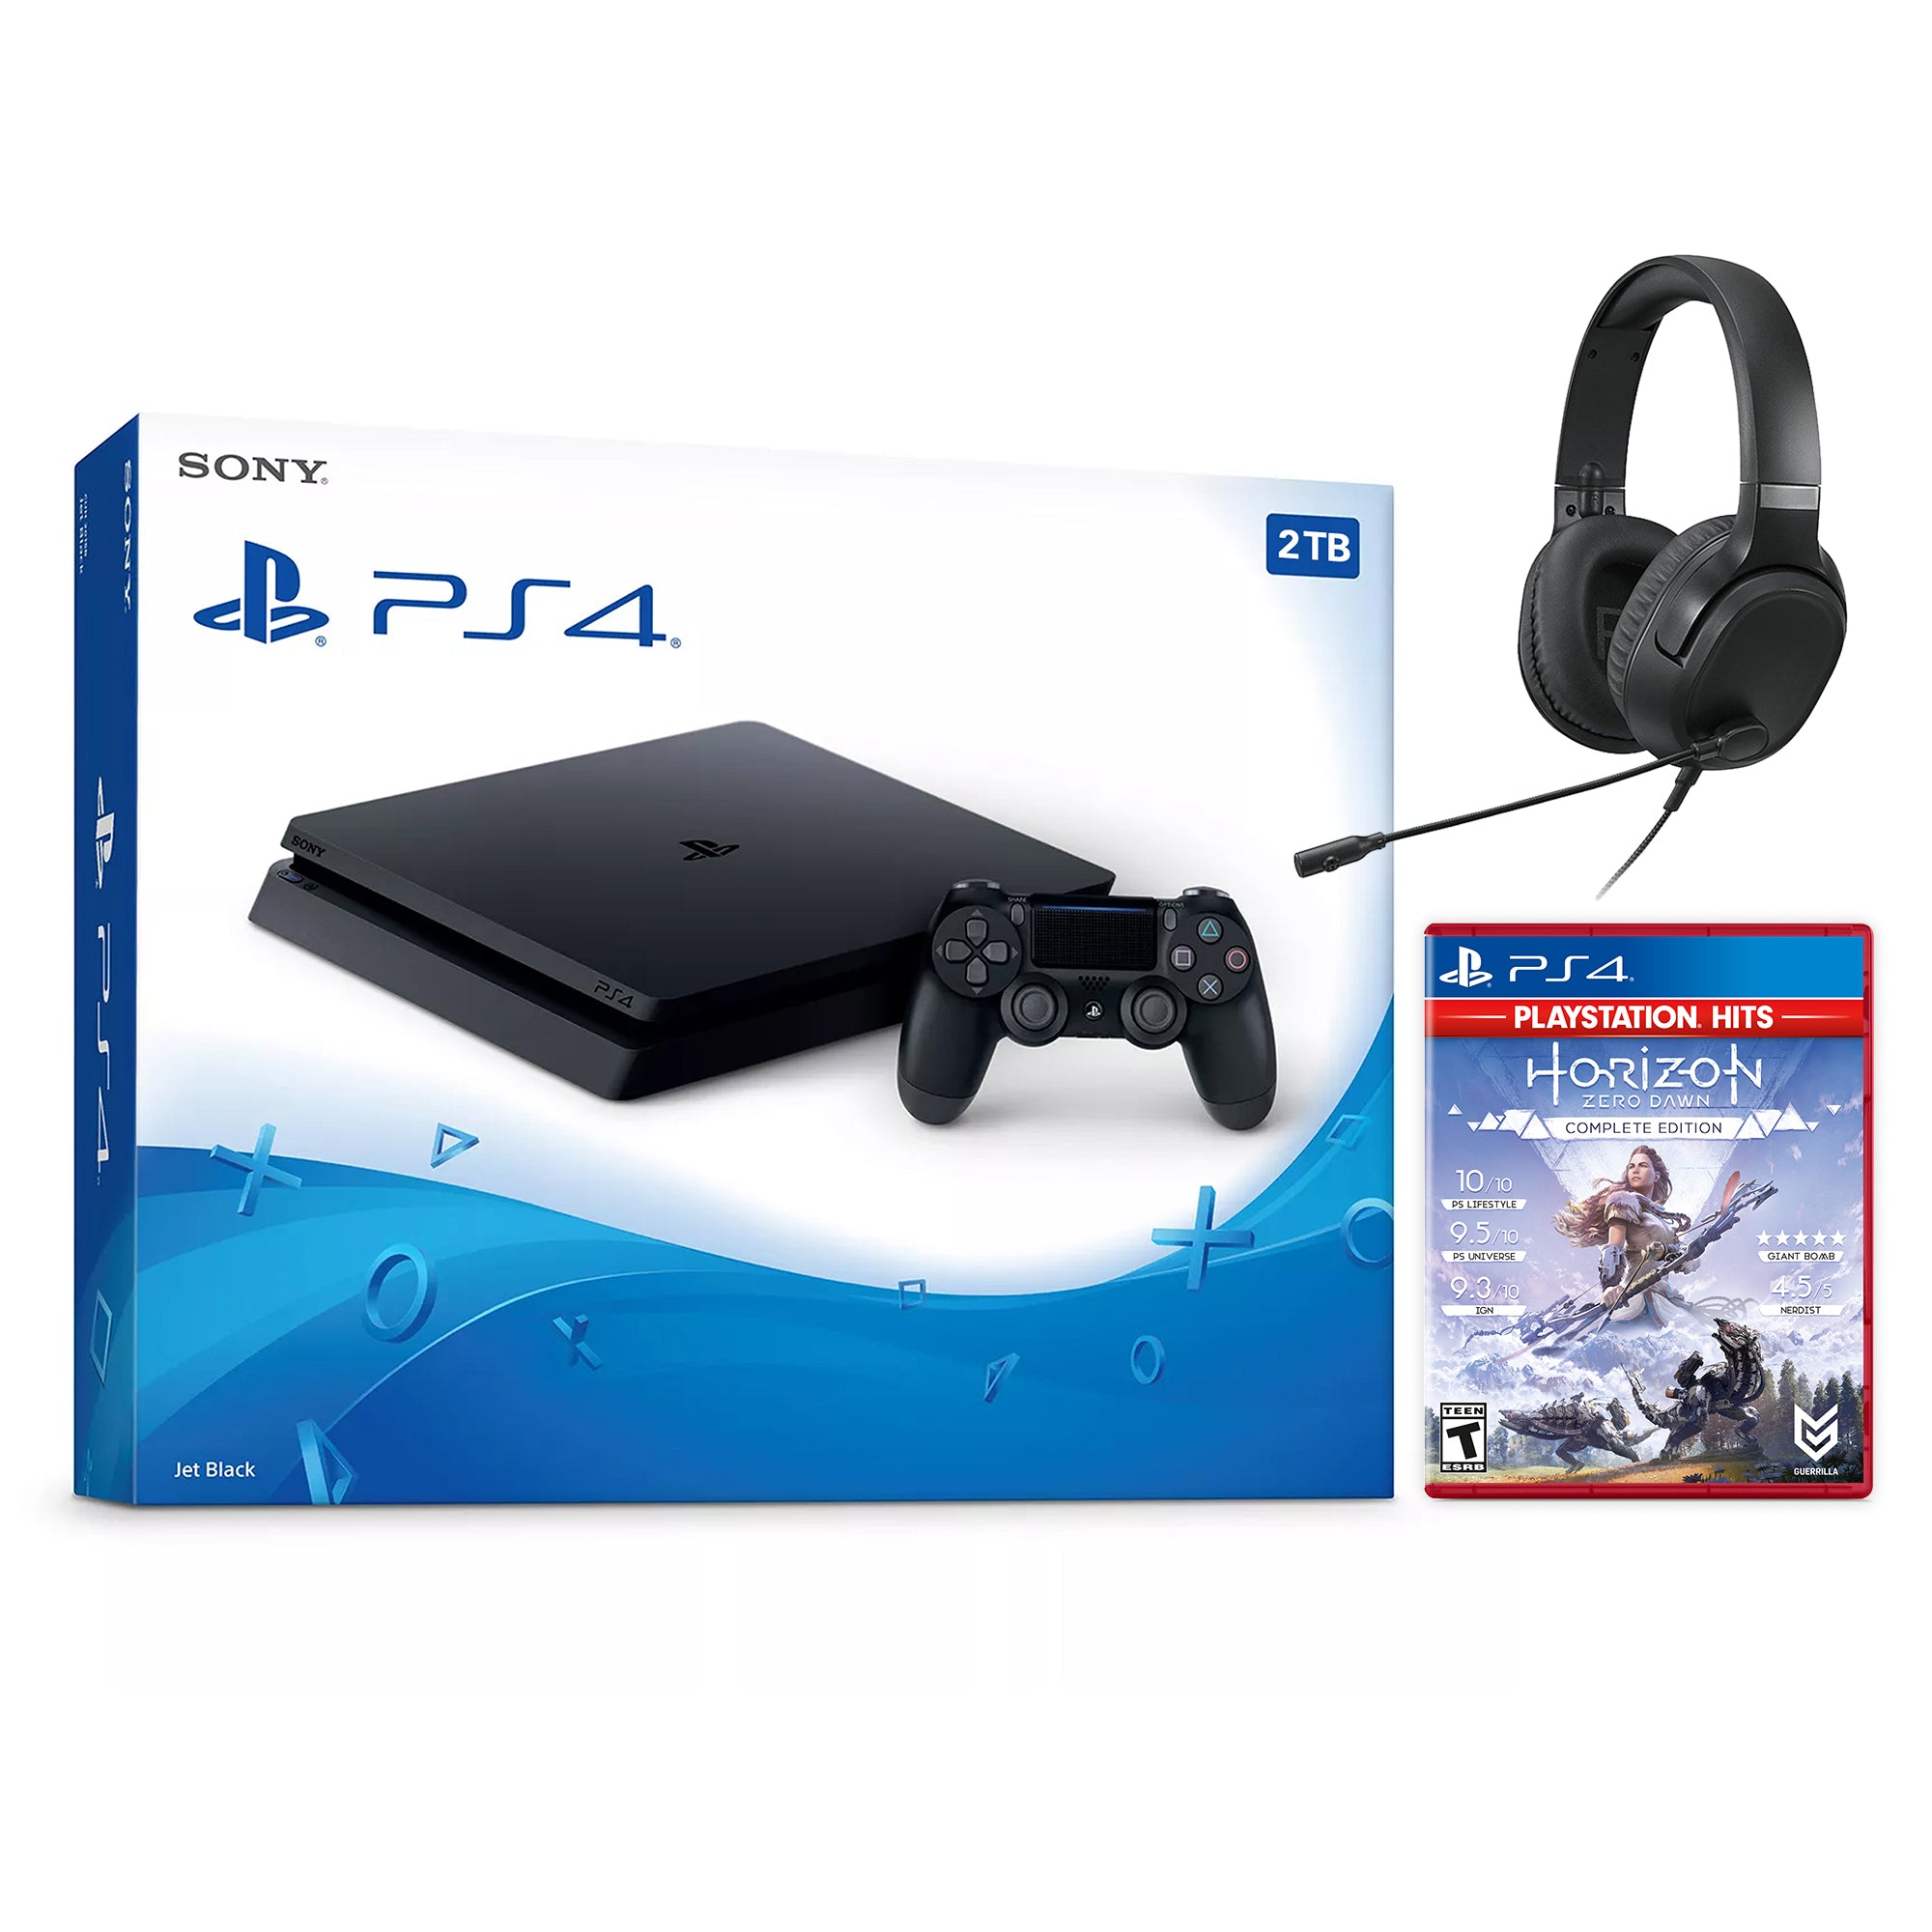 Sony PlayStation 4 Slim Horizon Zero Dawn Bundle Upgrade 2TB HDD PS4 Gaming Console, Jet Black, with Mytrix Chat Headset - Large Capacity Internal Hard Drive Enhanced PS4 Console